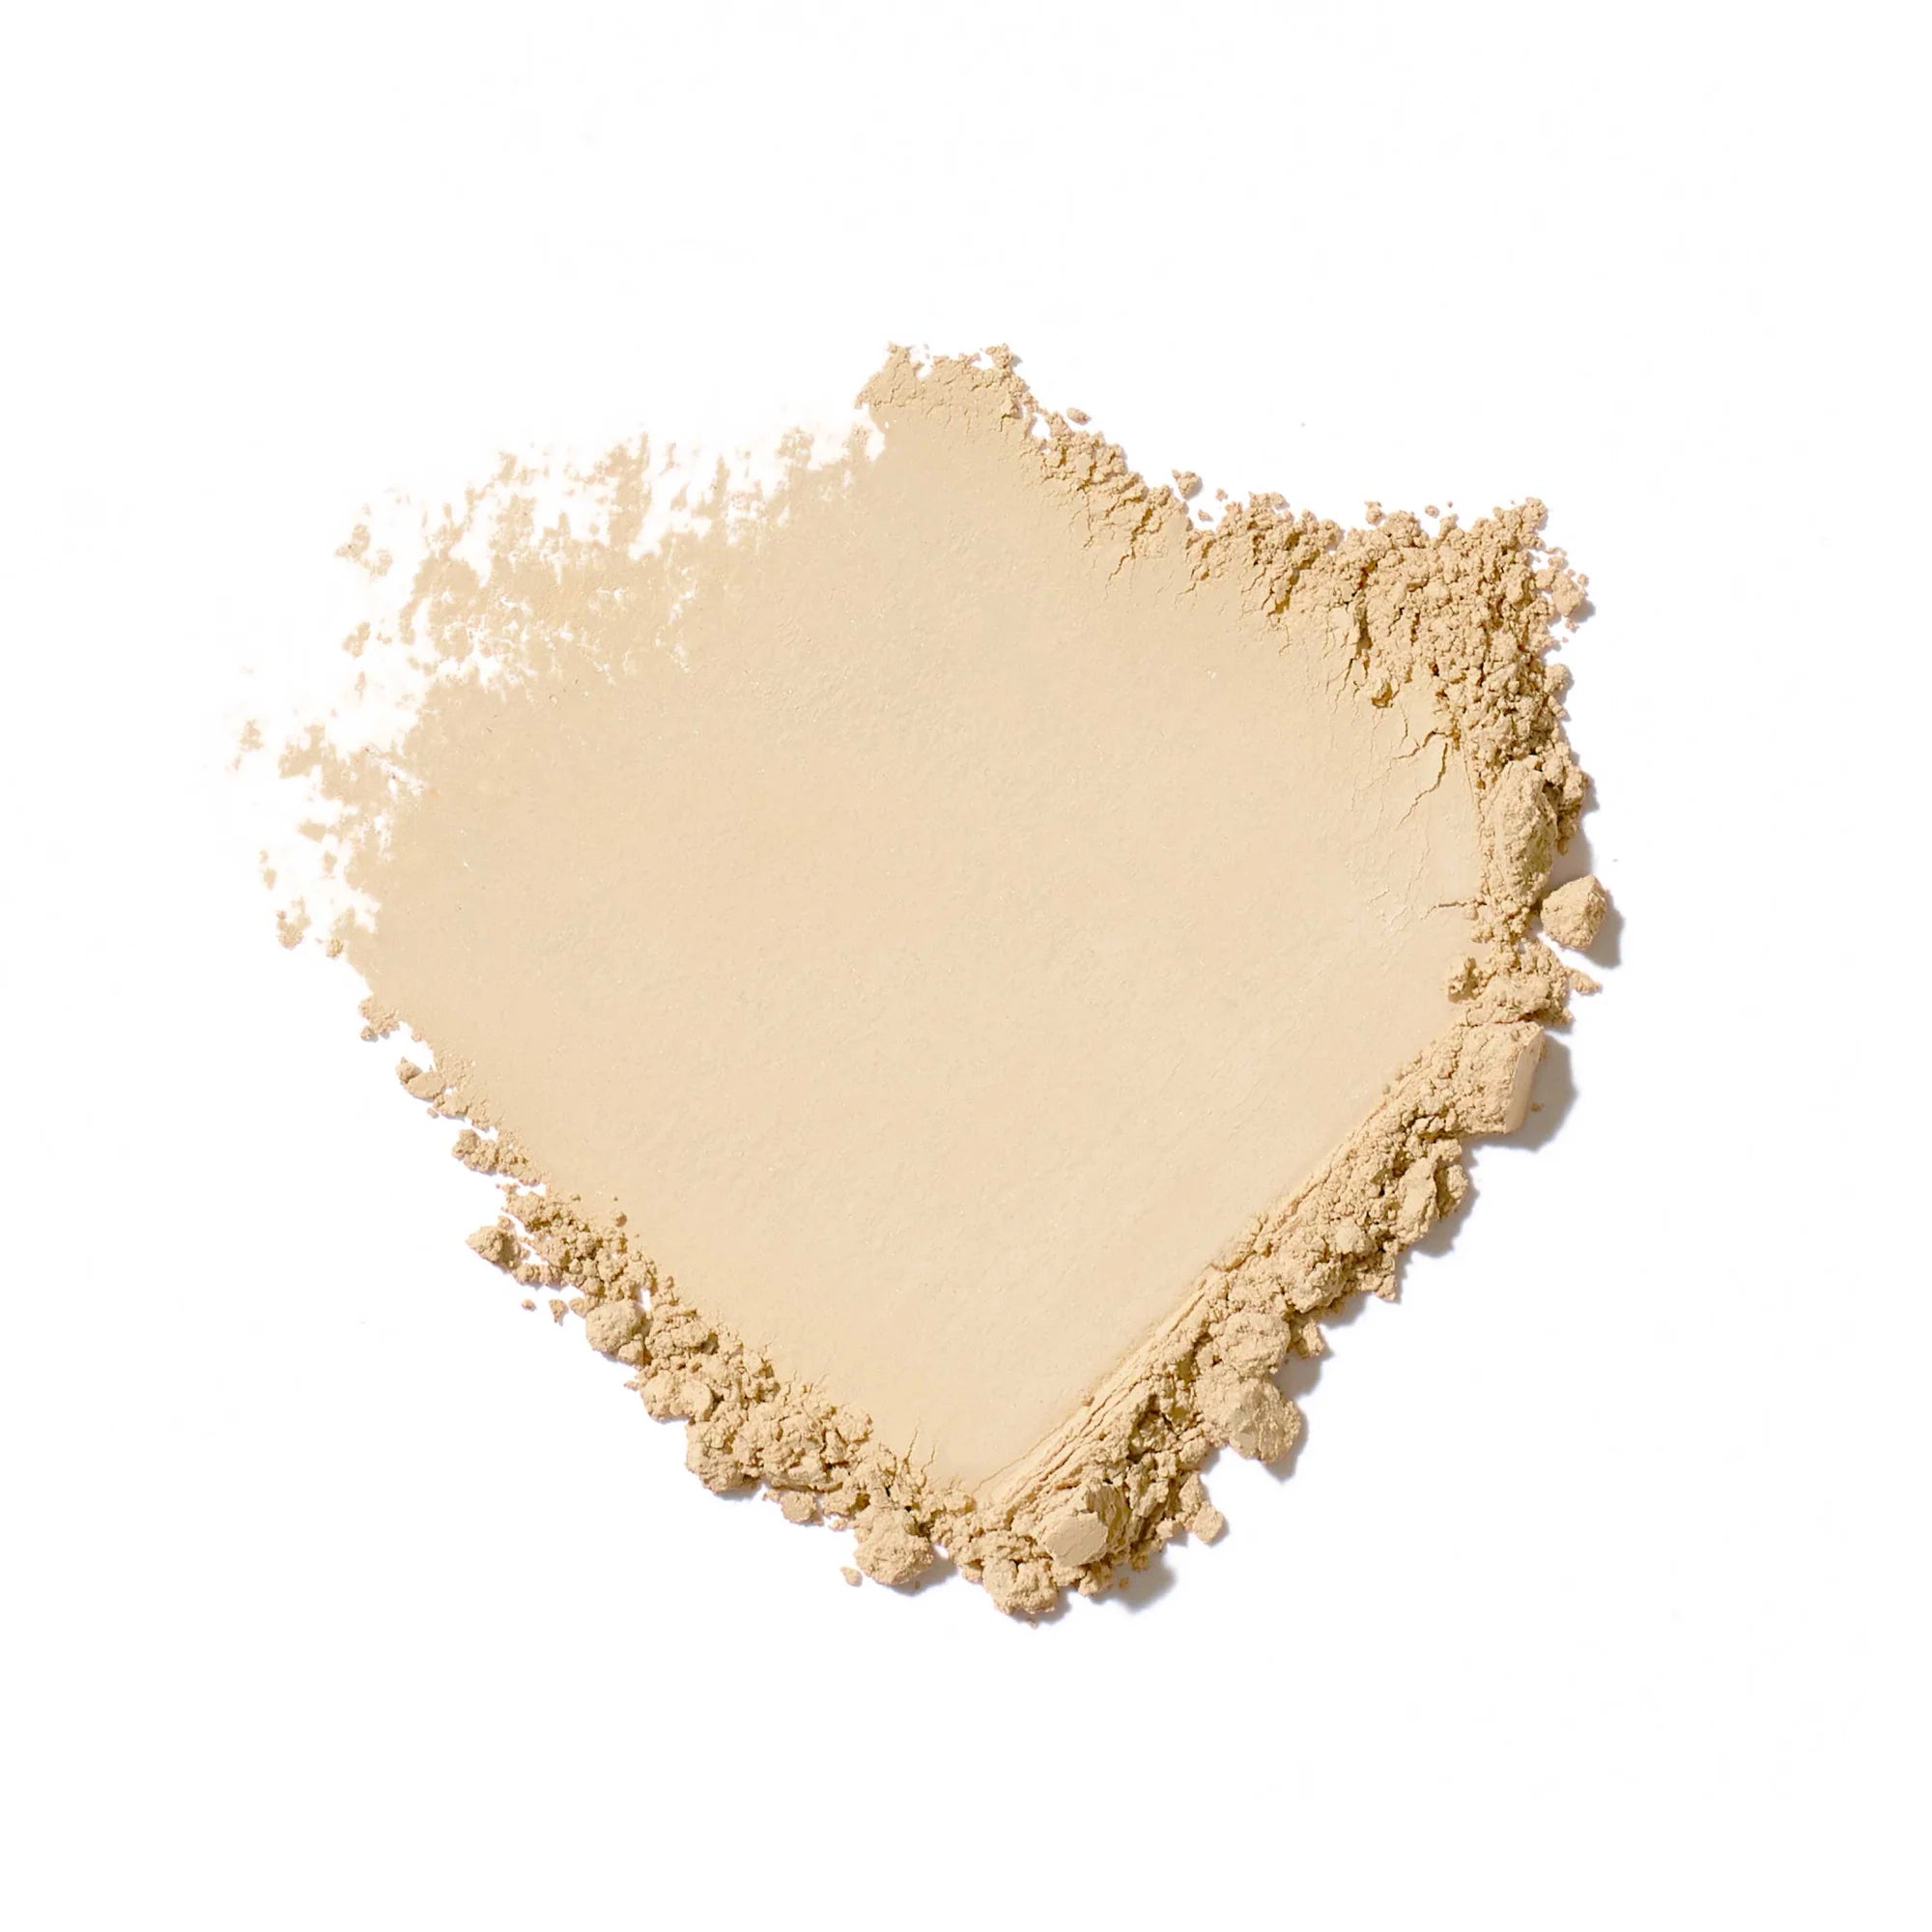 Jane Iredale's Amazing Base® Loose Mineral Powder SPF 20 - shade Warm Silk - Light with gold undertones